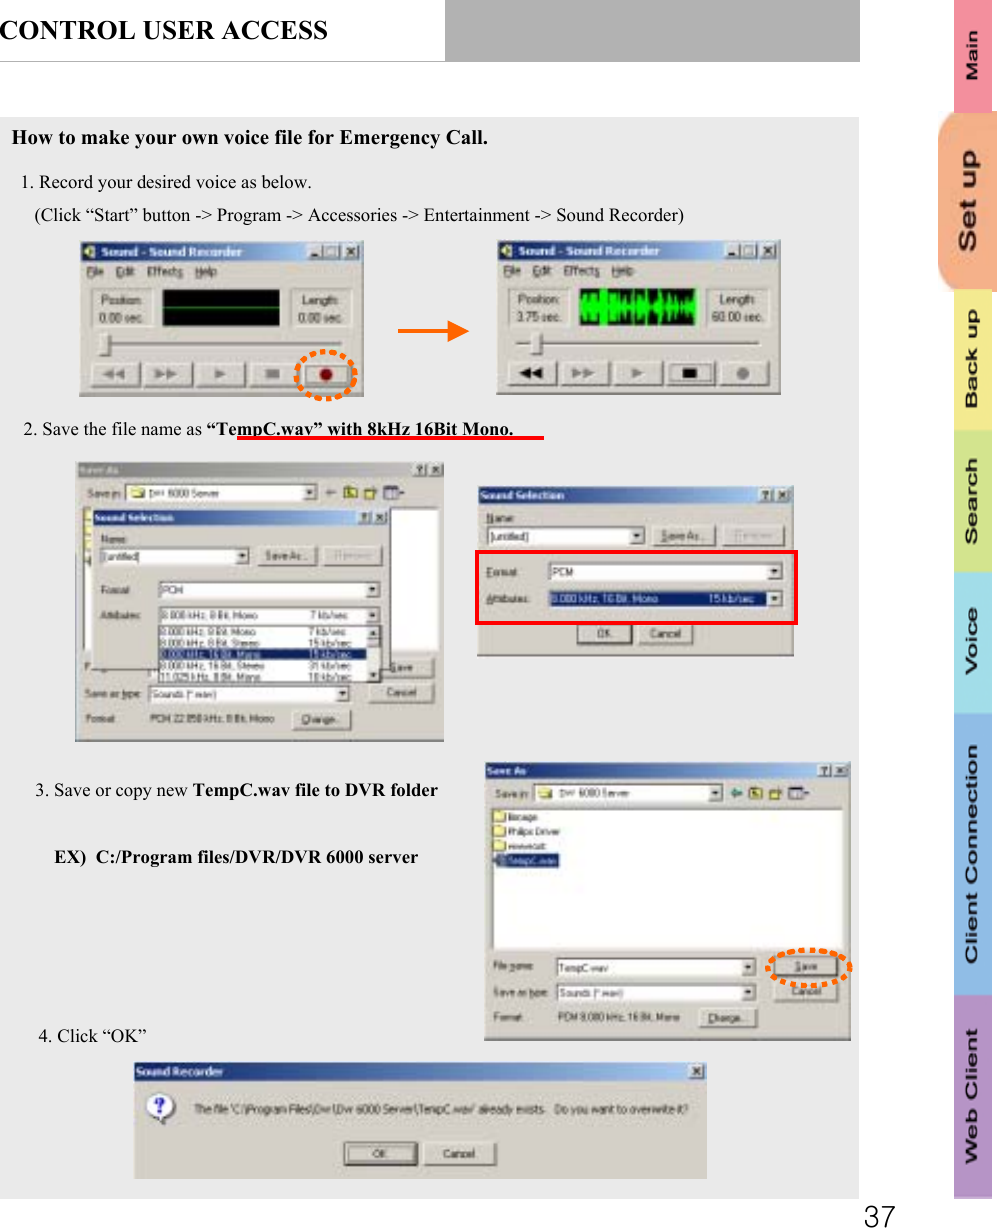 37CONTROL USER ACCESSHow to make your own voice file for Emergency Call.1. Record your desired voice as below.(Click “Start” button -&gt; Program -&gt; Accessories -&gt; Entertainment -&gt; Sound Recorder)2. Save the file name as “TempC.wav” with 8kHz 16Bit Mono.3. Save or copy new TempC.wav file to DVR folderEX)  C:/Program files/DVR/DVR 6000 server4. Click “OK”